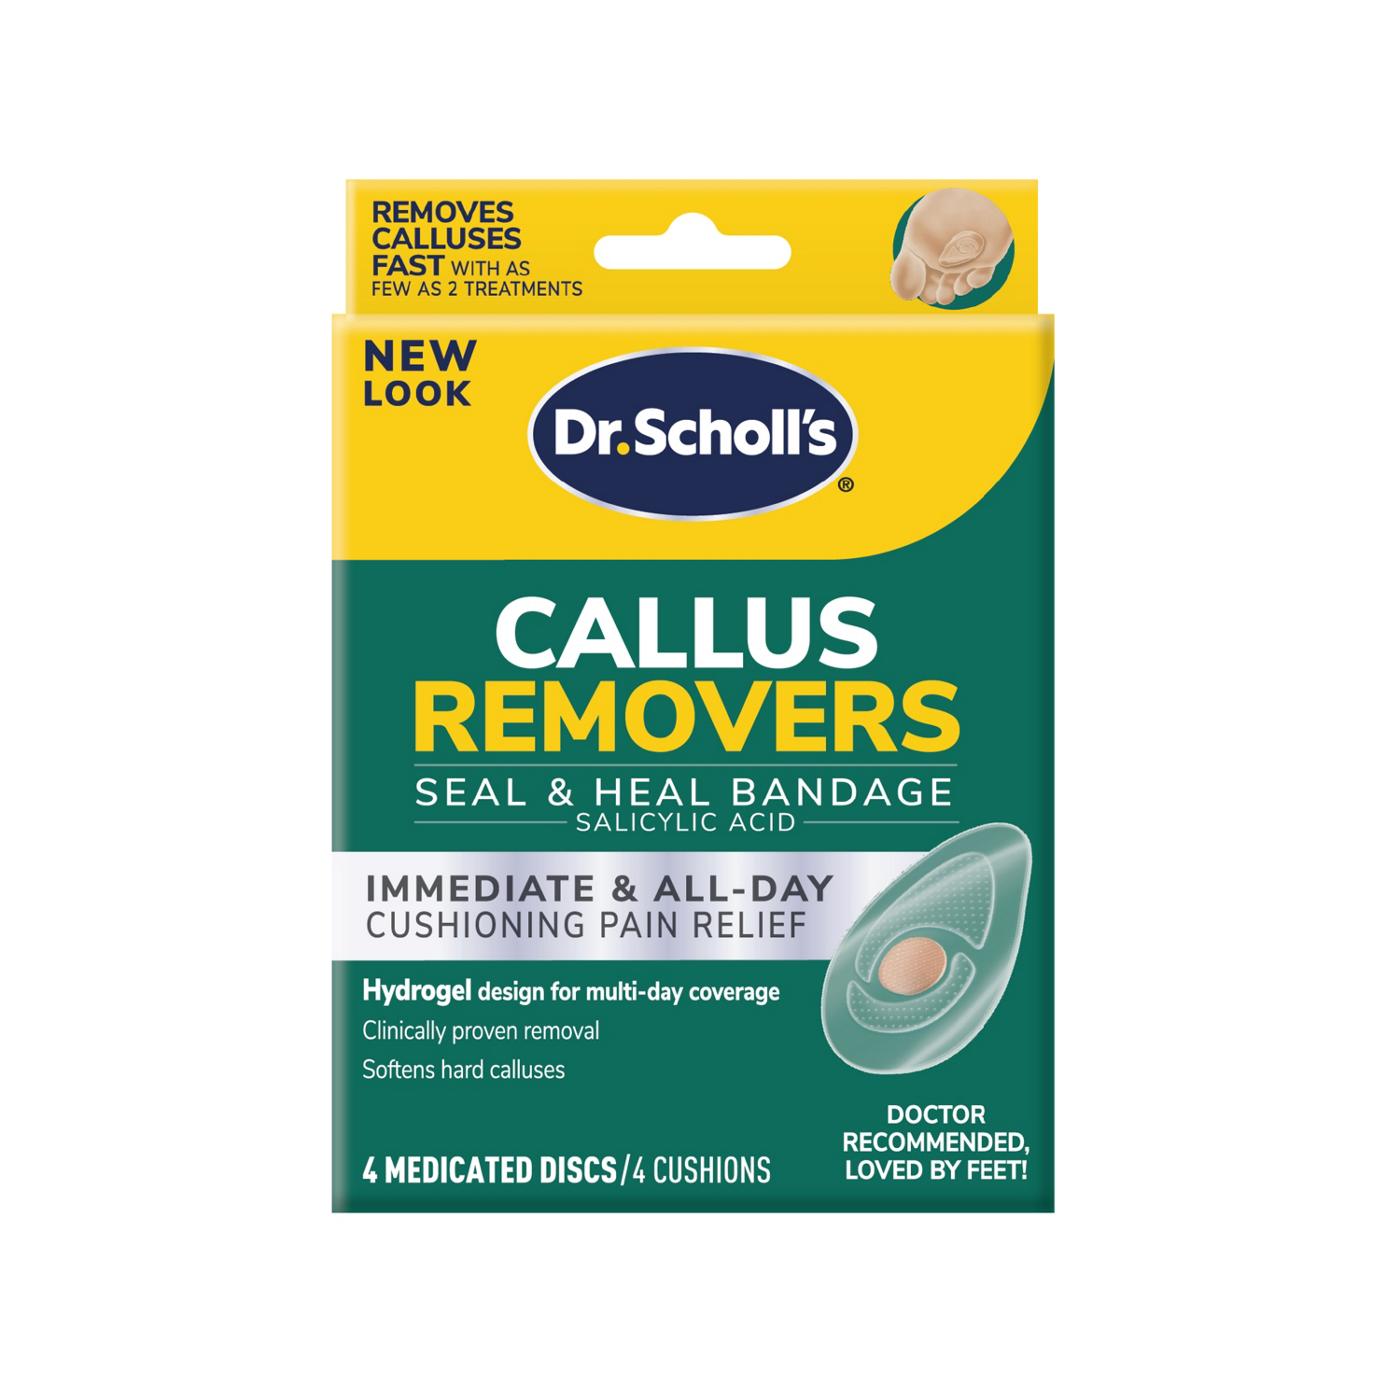 Dr. Scholl's Callus Removers; image 1 of 2